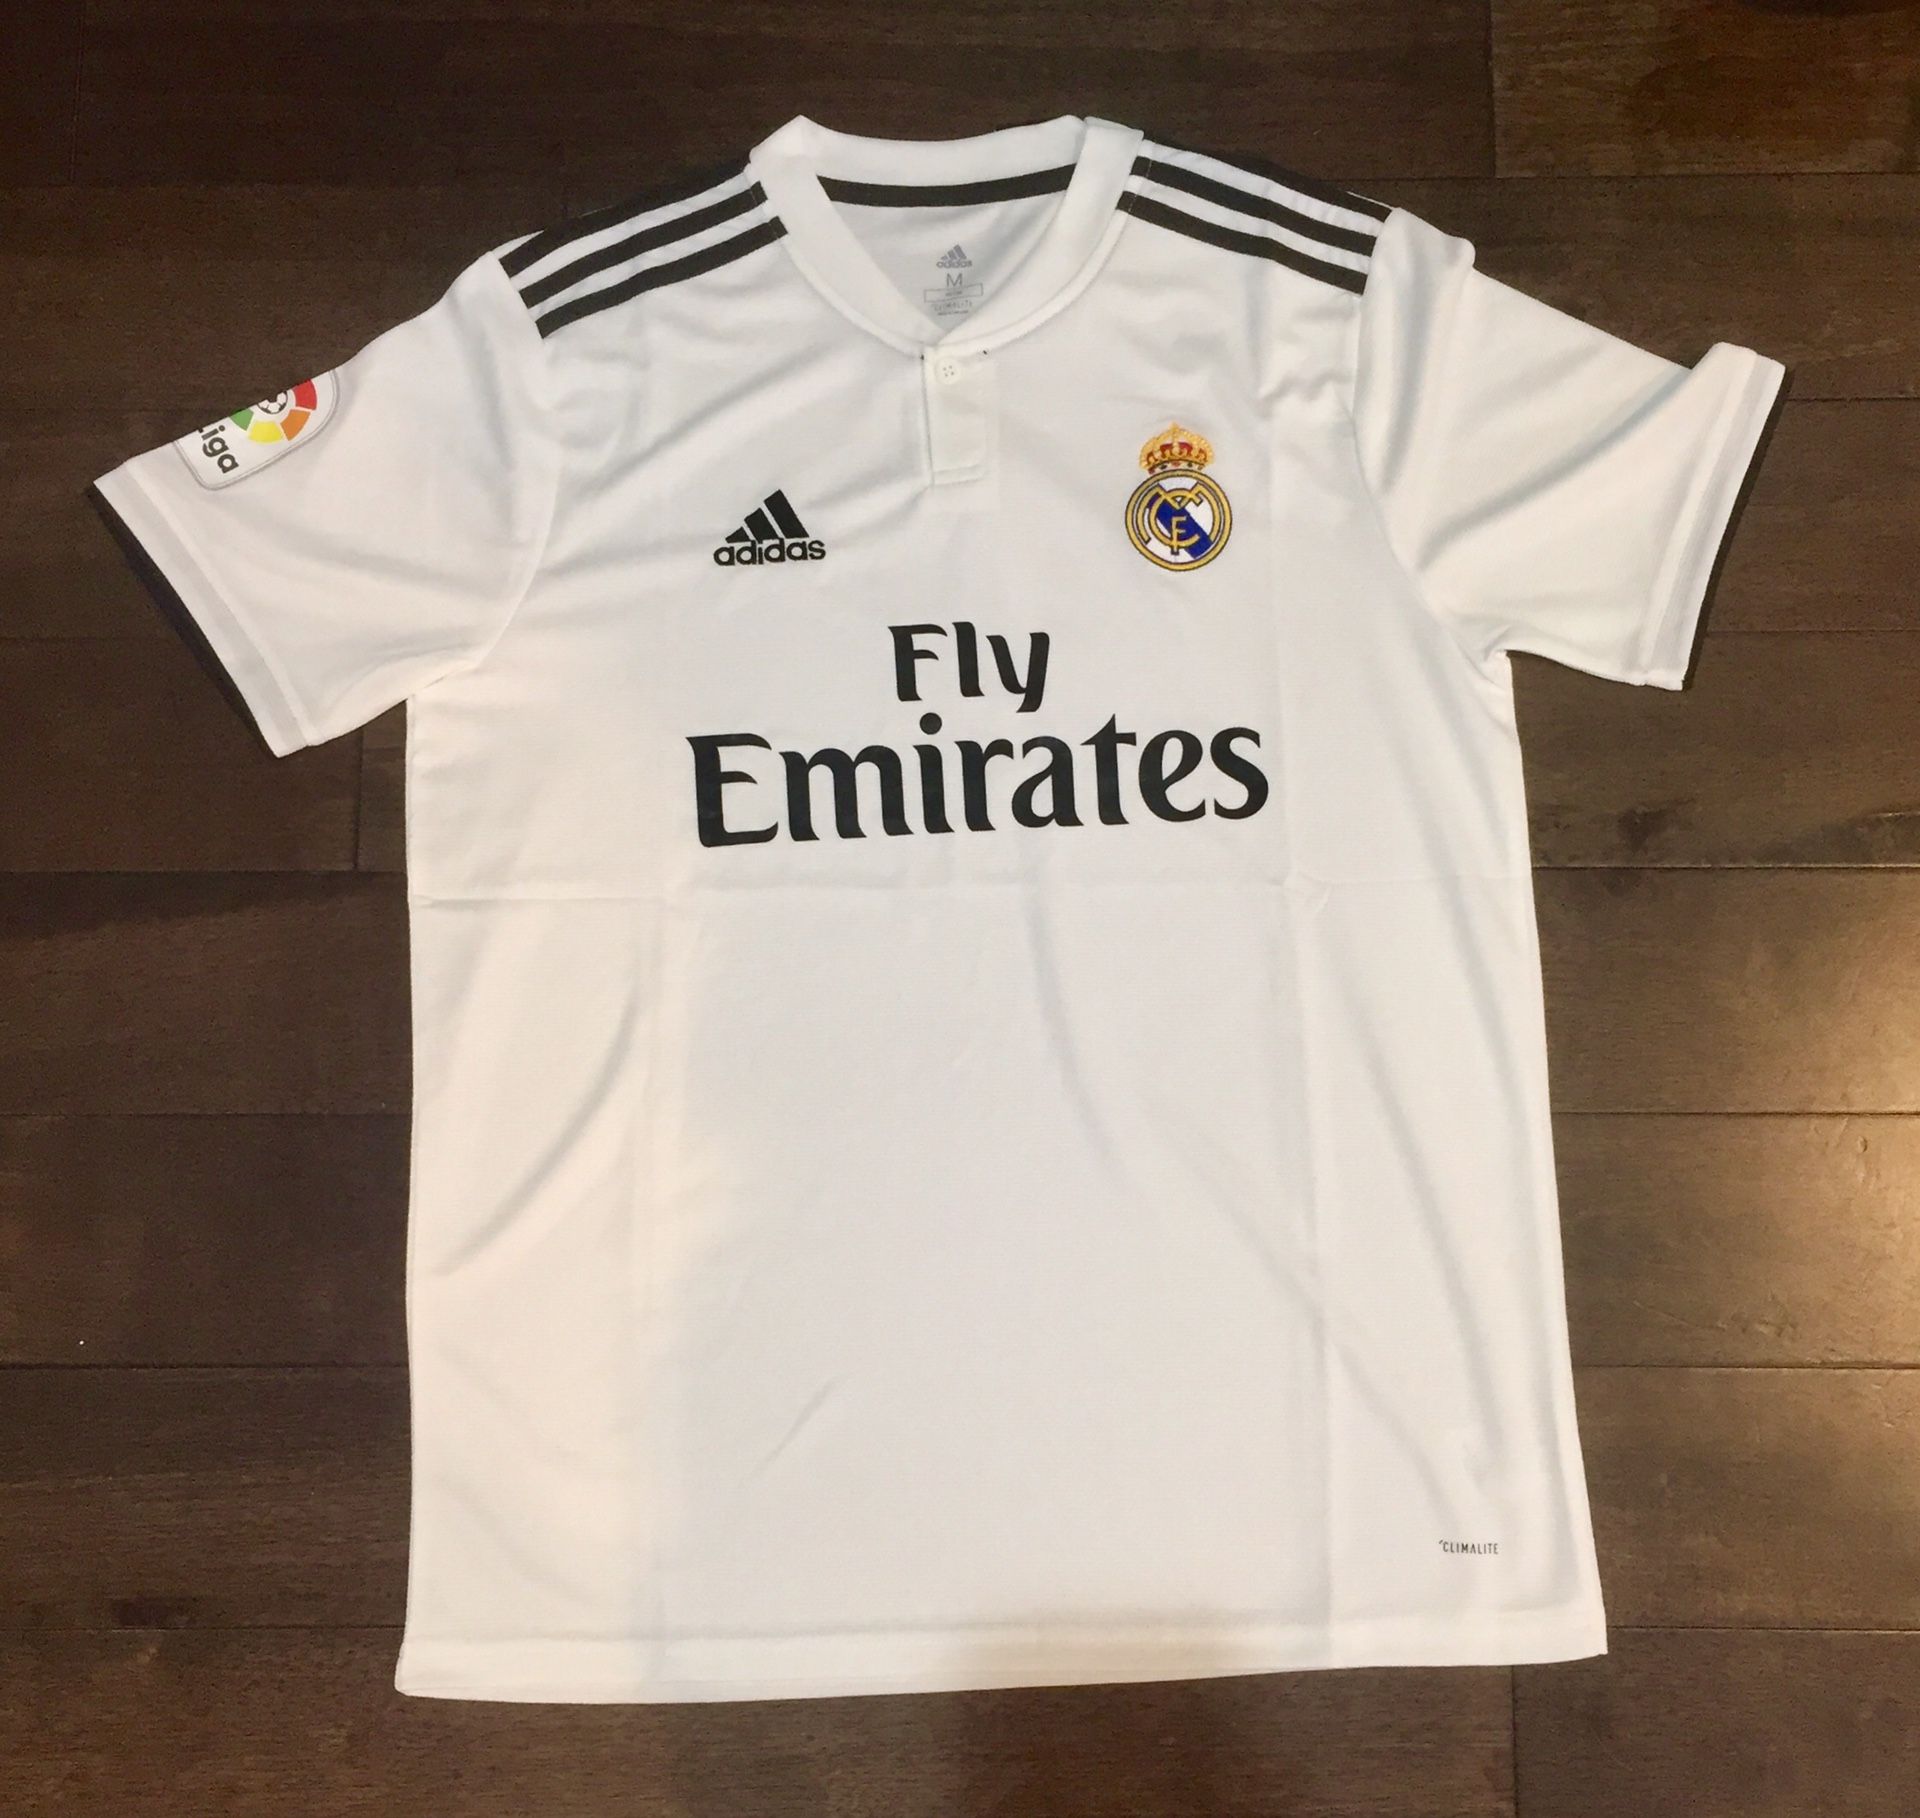 NEW Real Madrid home jersey 2018/19 size M